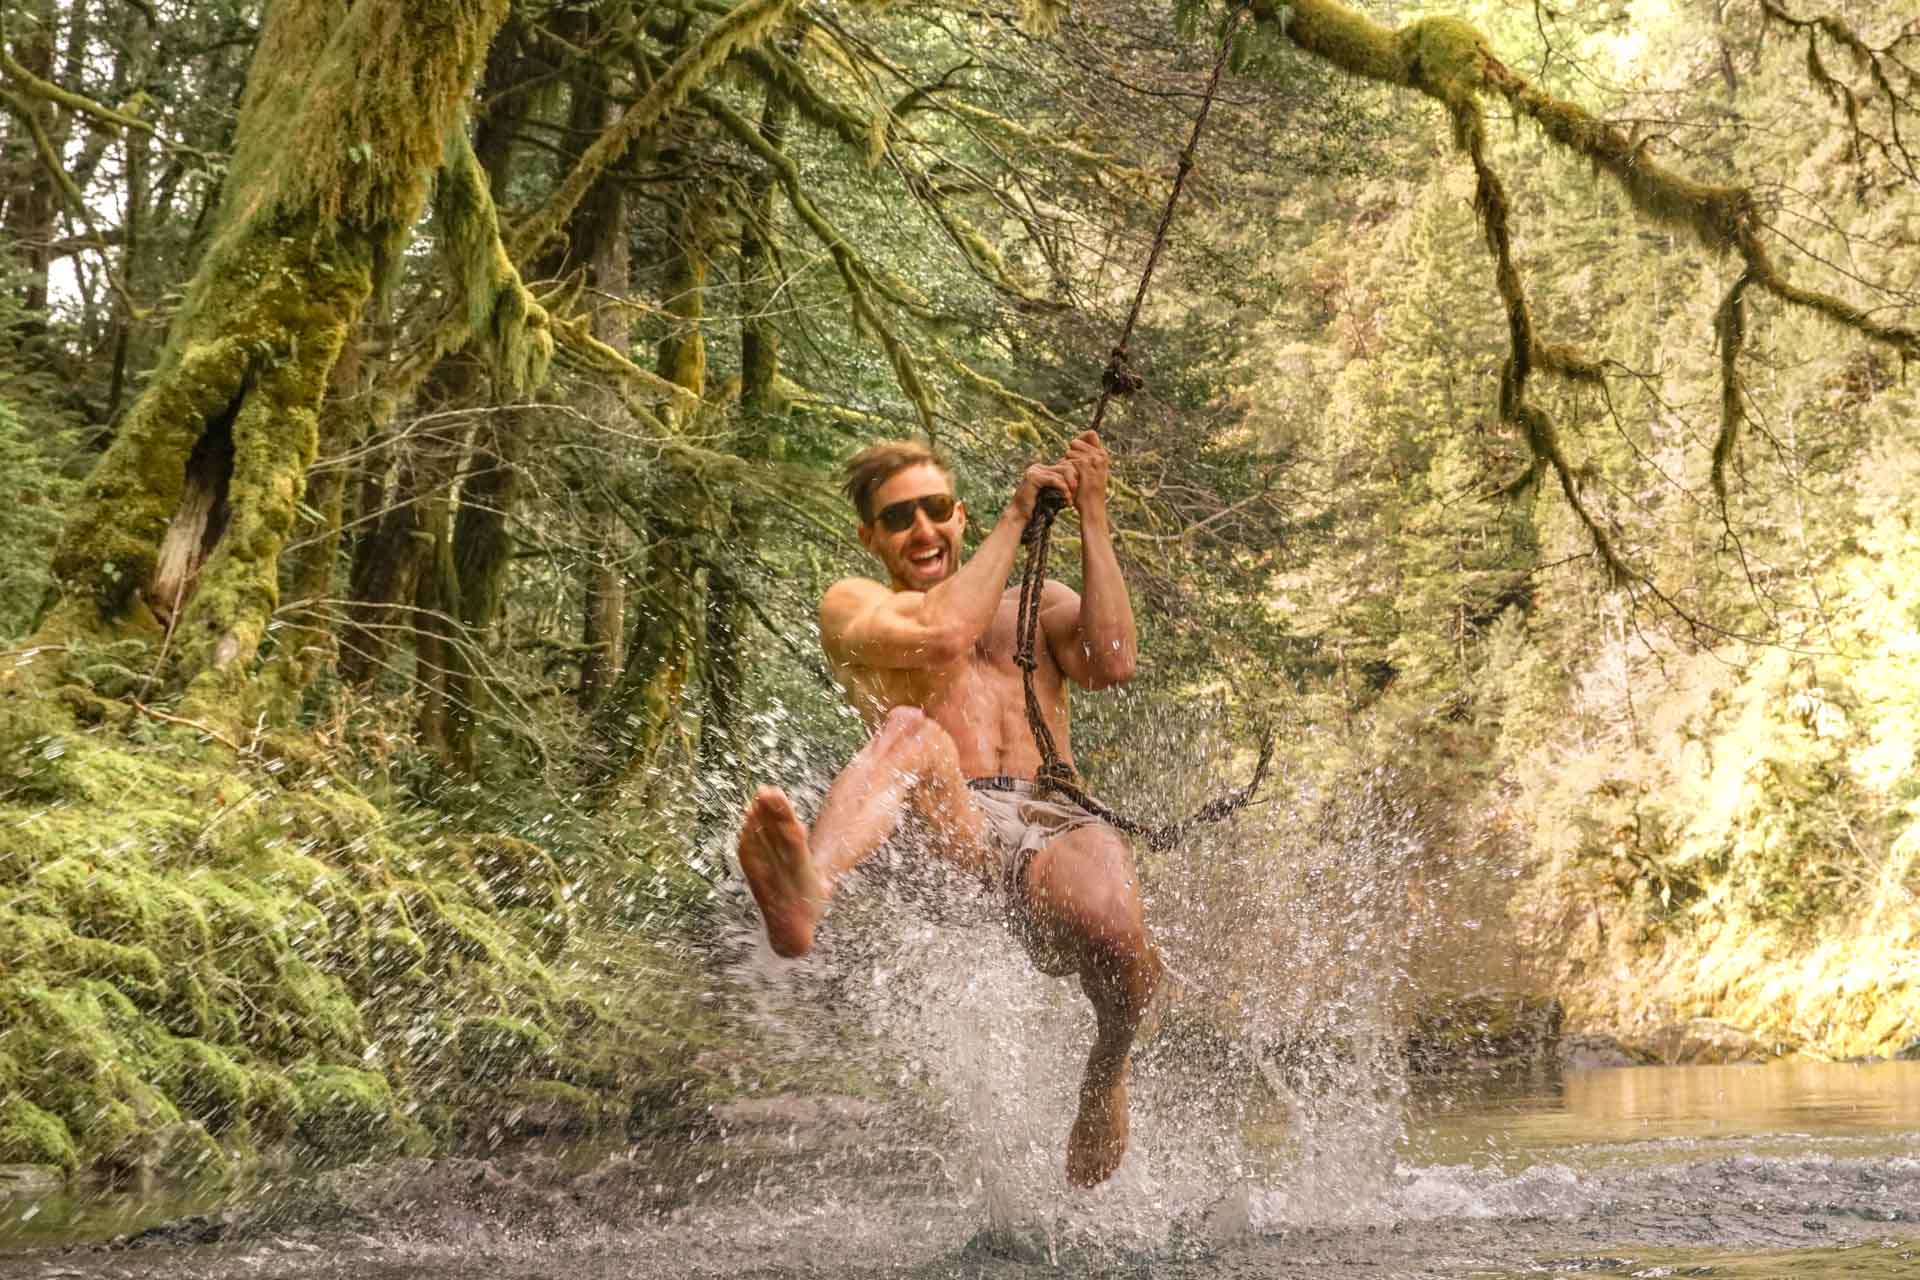 mattebrown_grey Man on a rope swing in a river wearing Ombraz classic armless strap sunglasses